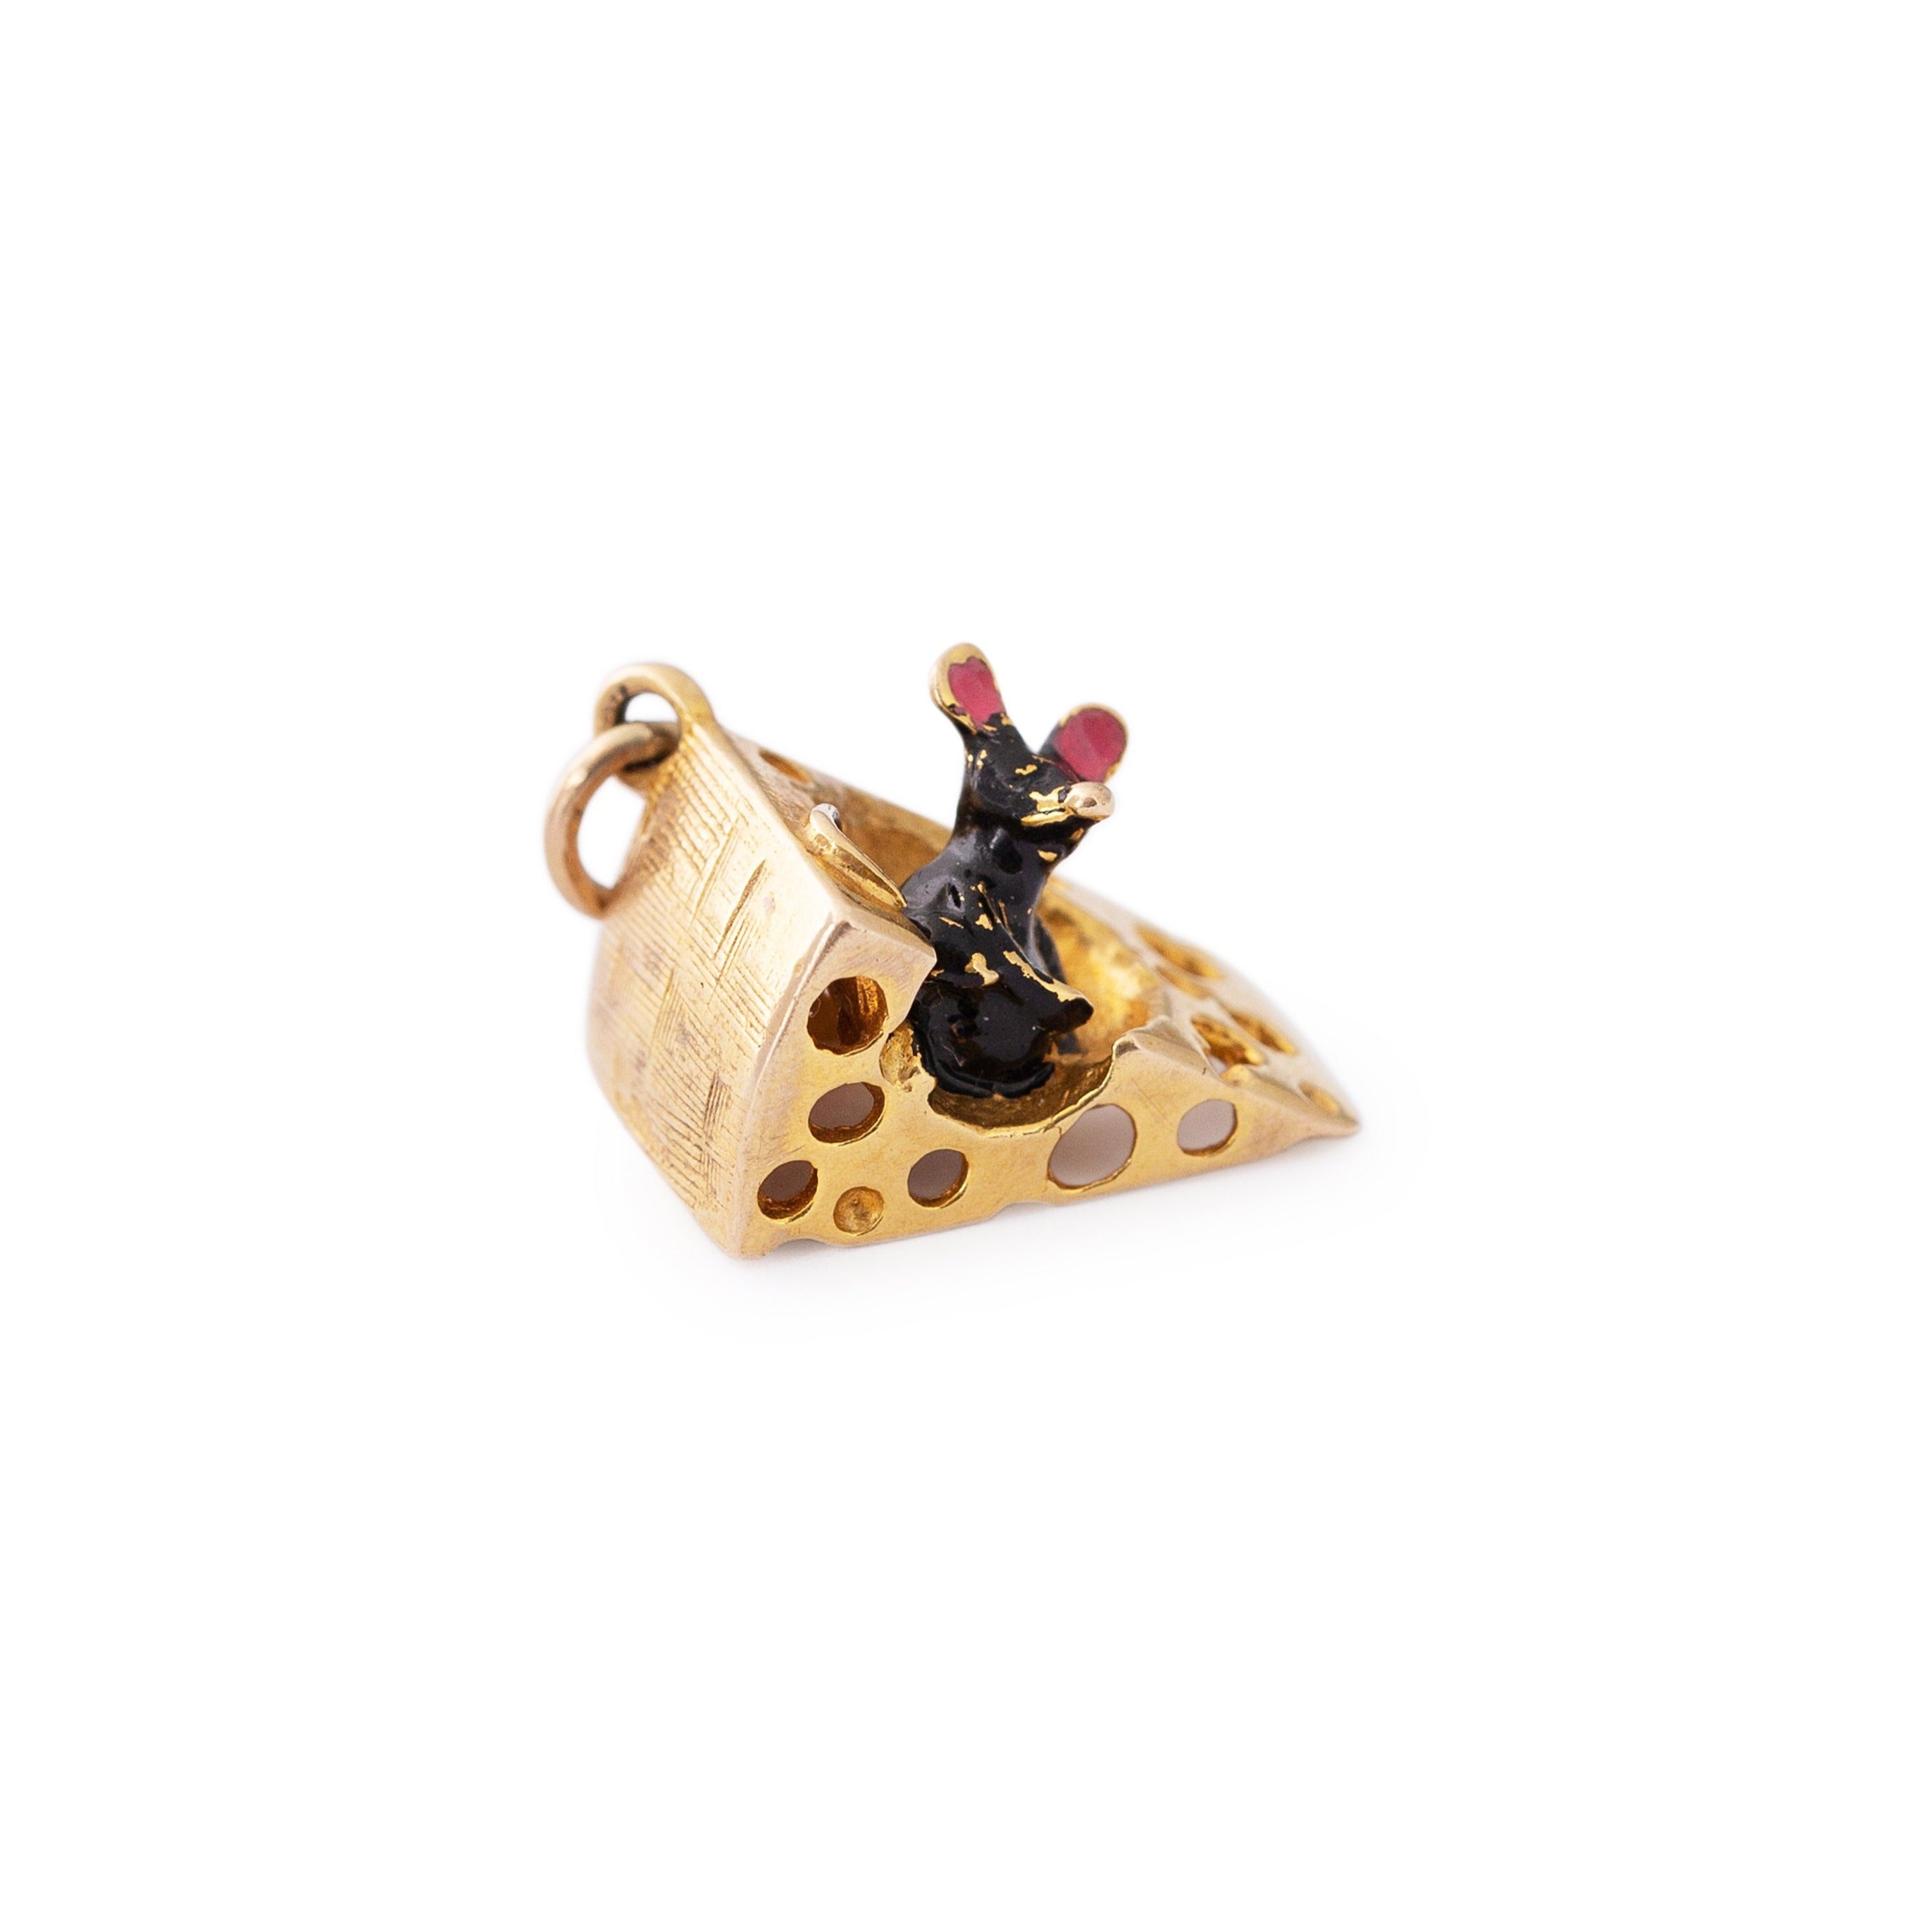 English Mouse and Cheese 9k Gold and Enamel Charm